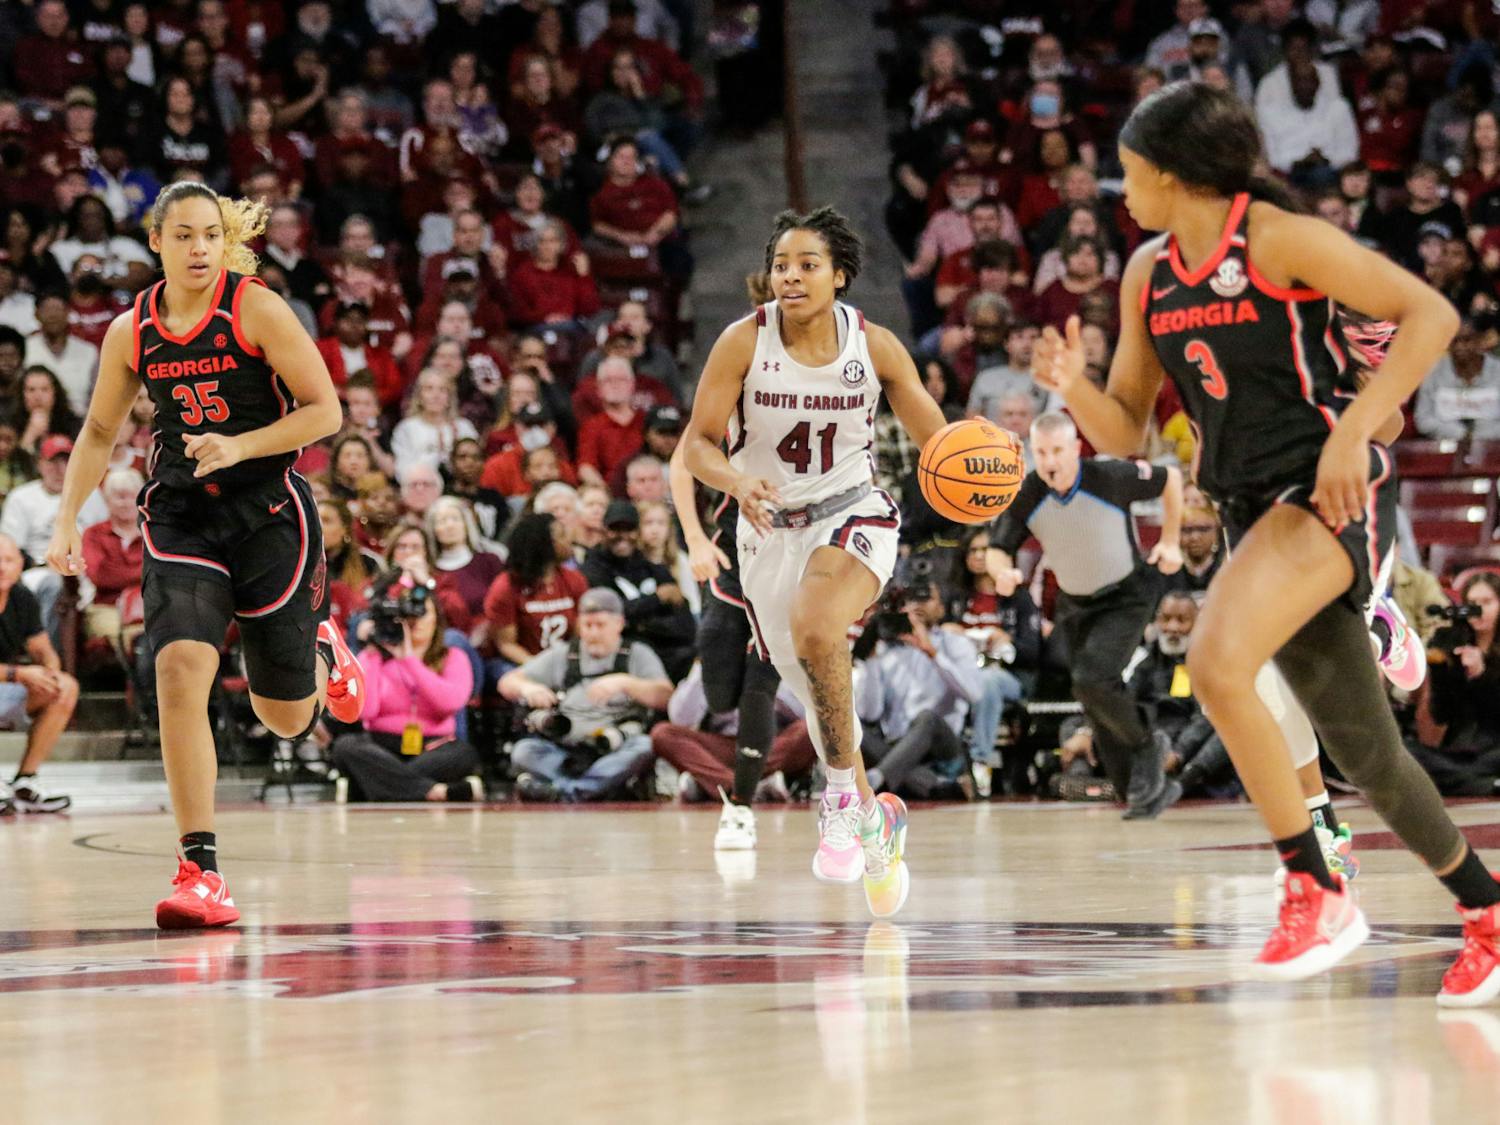 Graduate student guard Kierra Fletcher dribbles the ball during South Carolina’s game against Georgia at Colonial Life Arena on Feb. 26, 2023. The Gamecocks beat the Bulldogs 73-63.